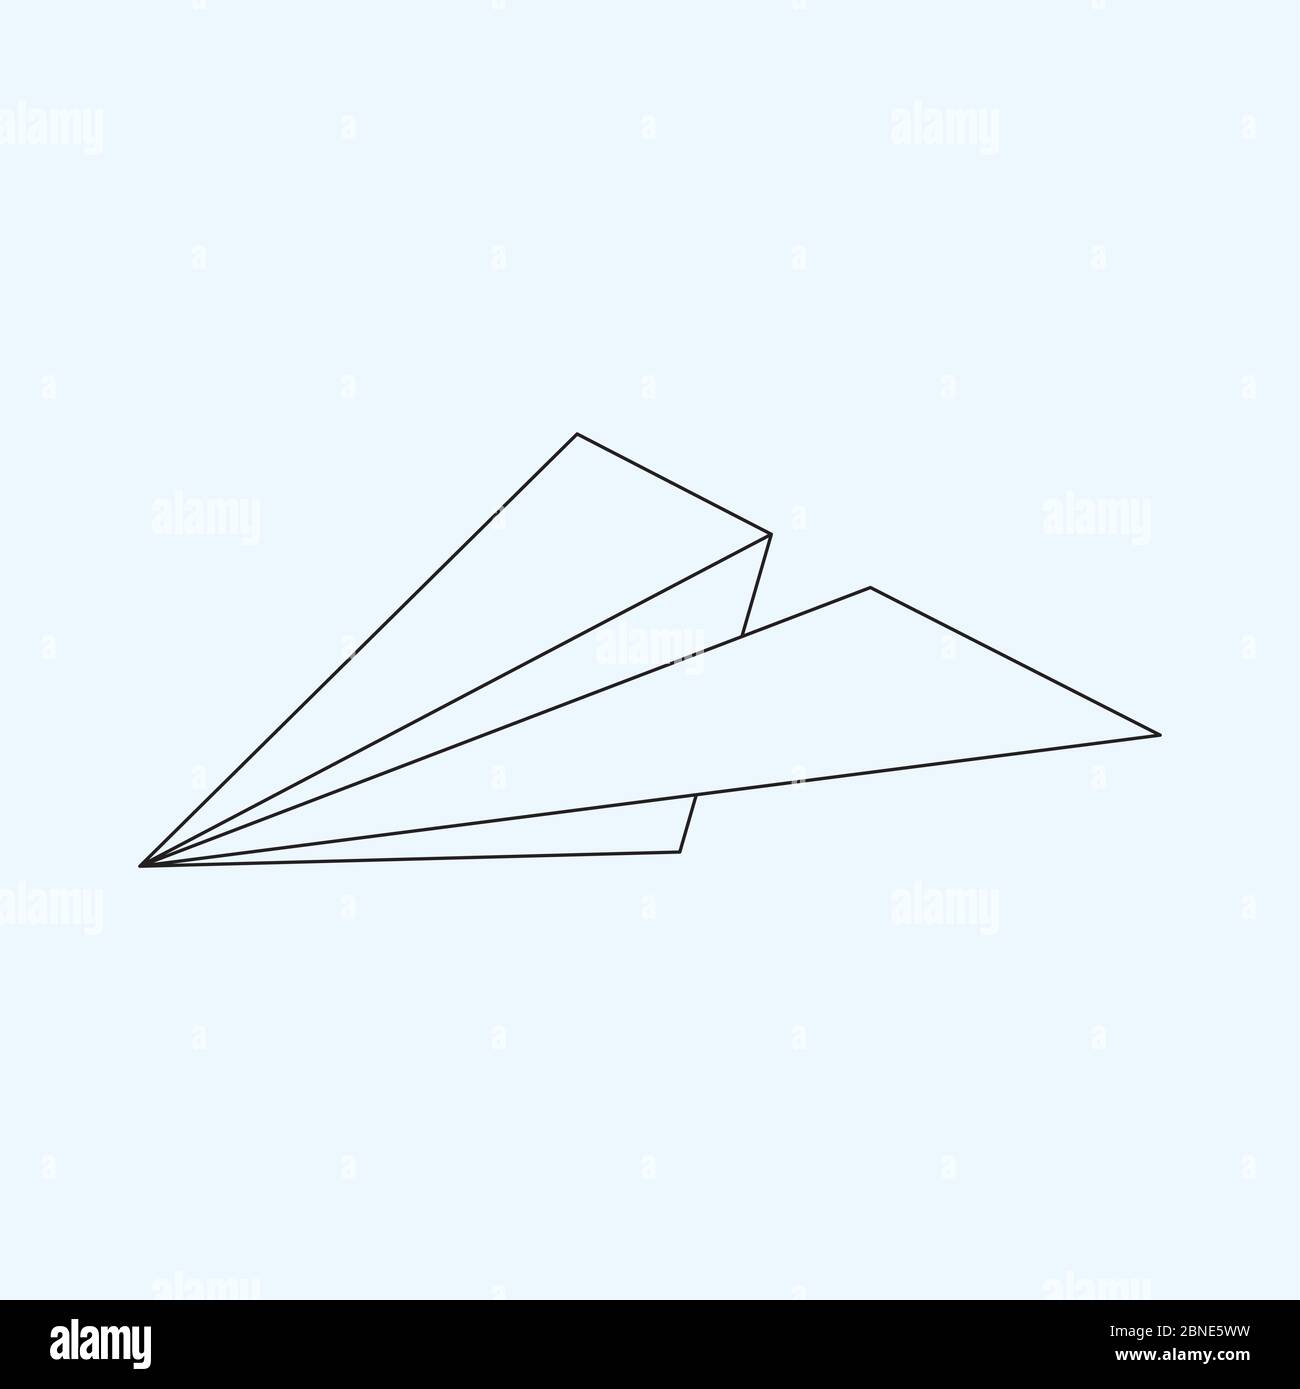 Paper plane flat line icon isolated on light blue background. Contour symbol of a papercraft origami airplane. Vector eps8 linear illustration. Stock Vector